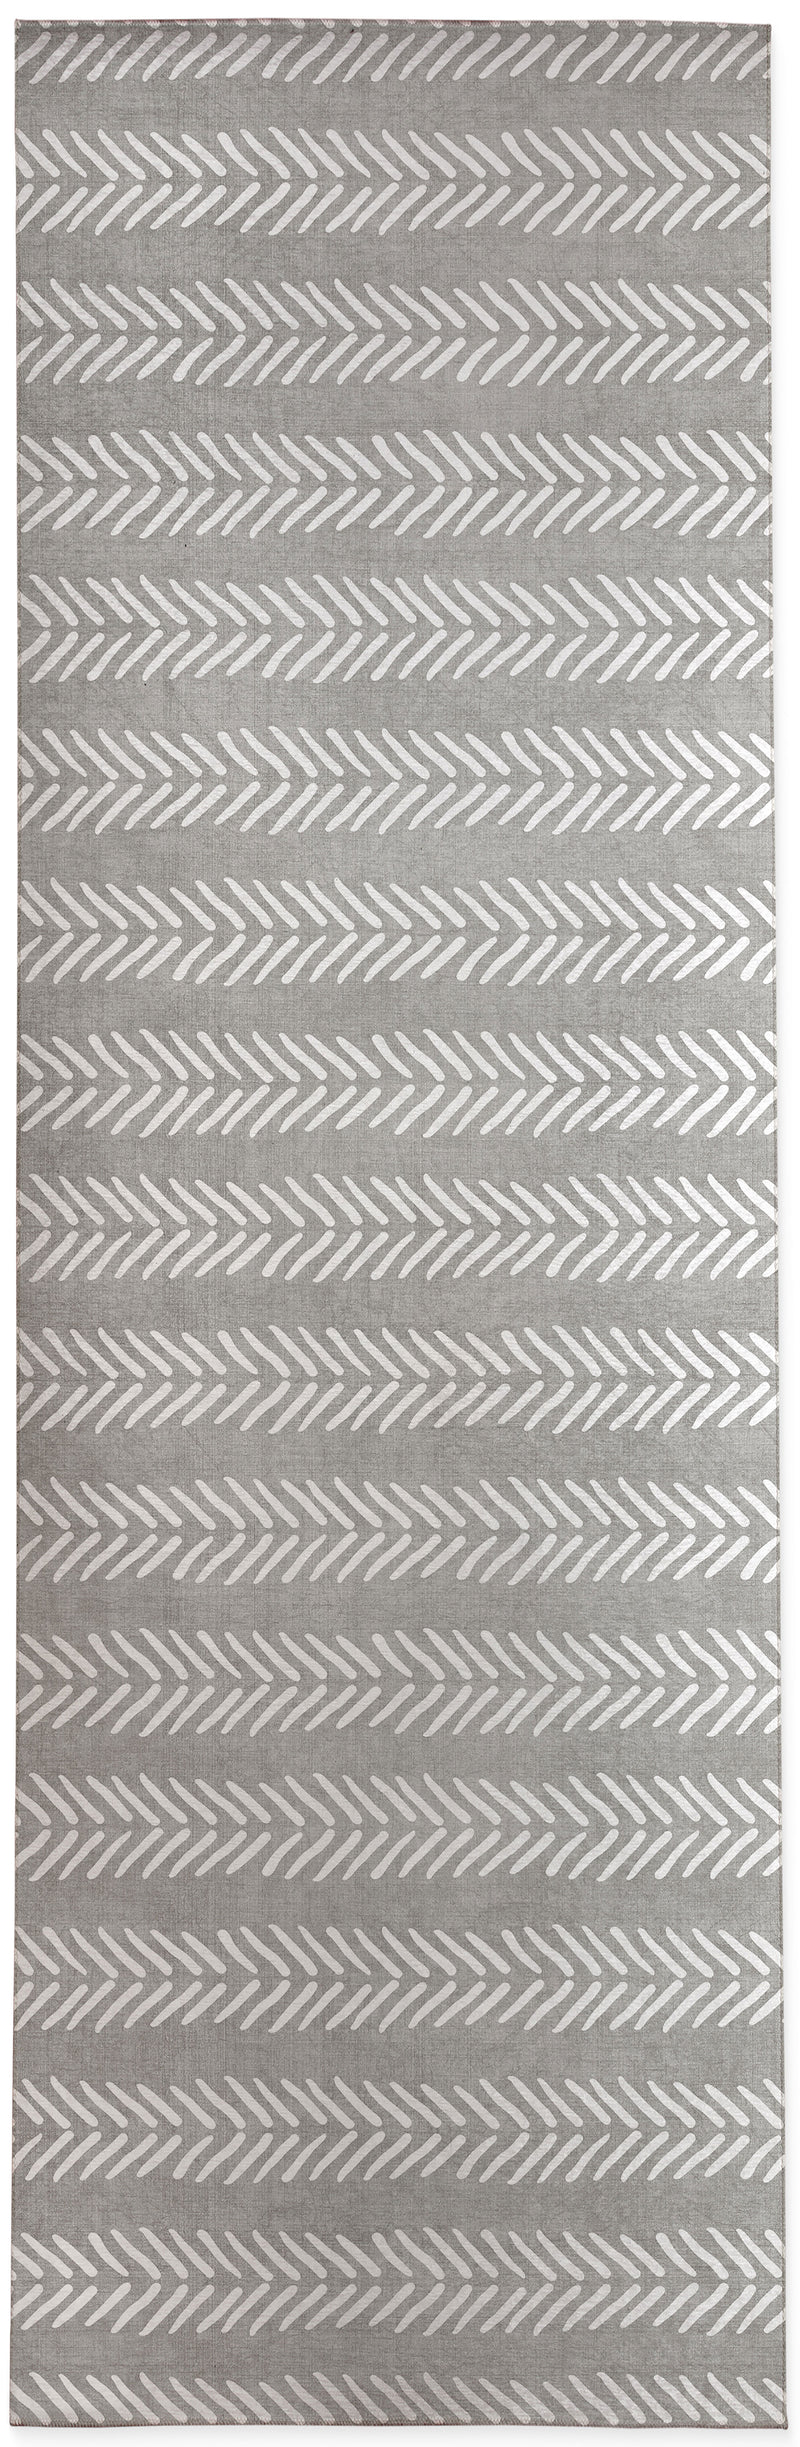 GREY WILLOW Area Rug By House of HaHa